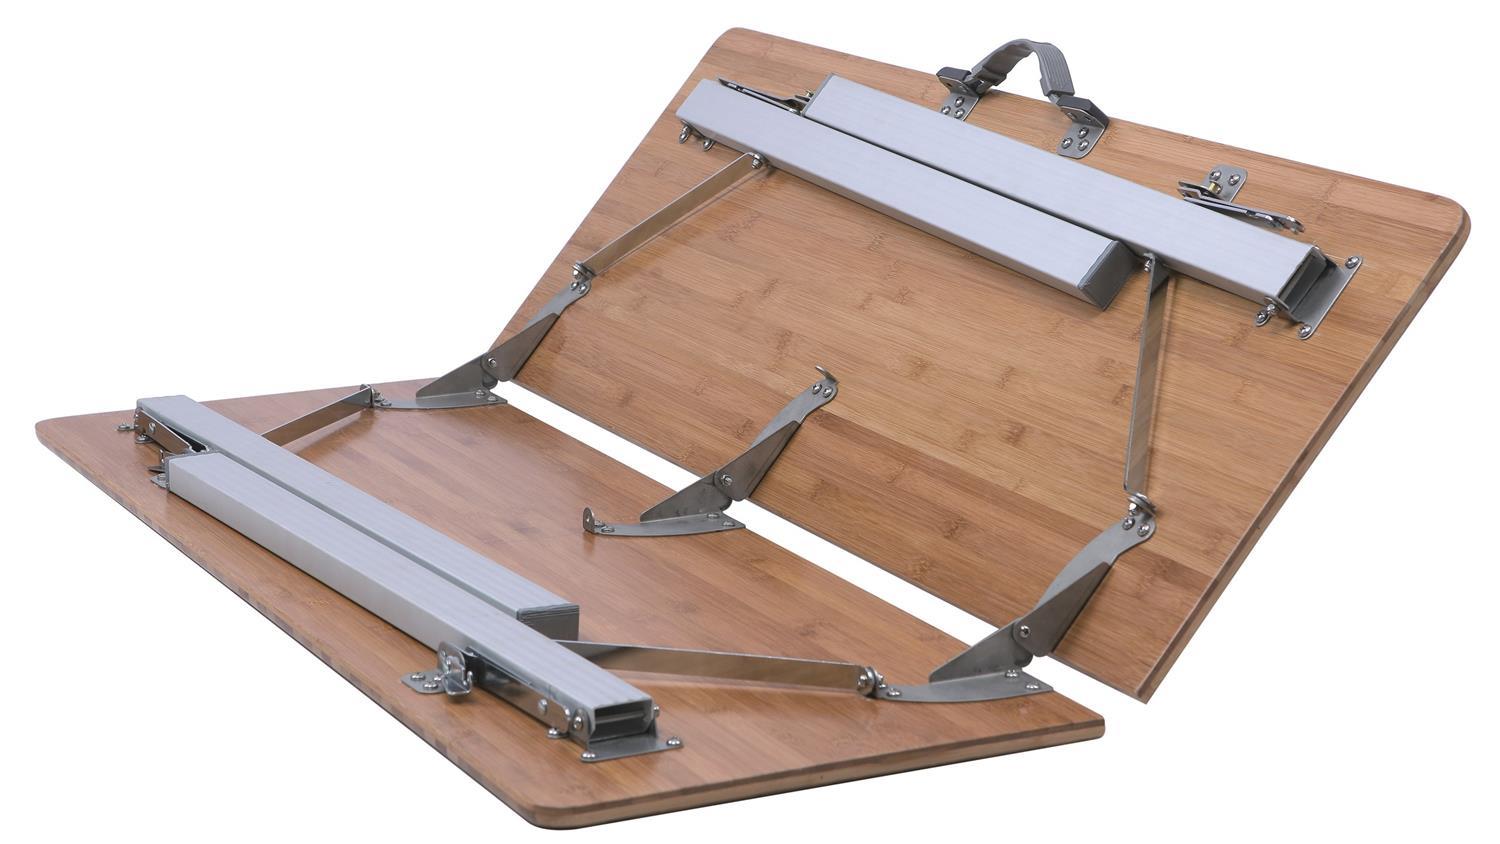 The Outwell Kamloops Camping Table folds down well